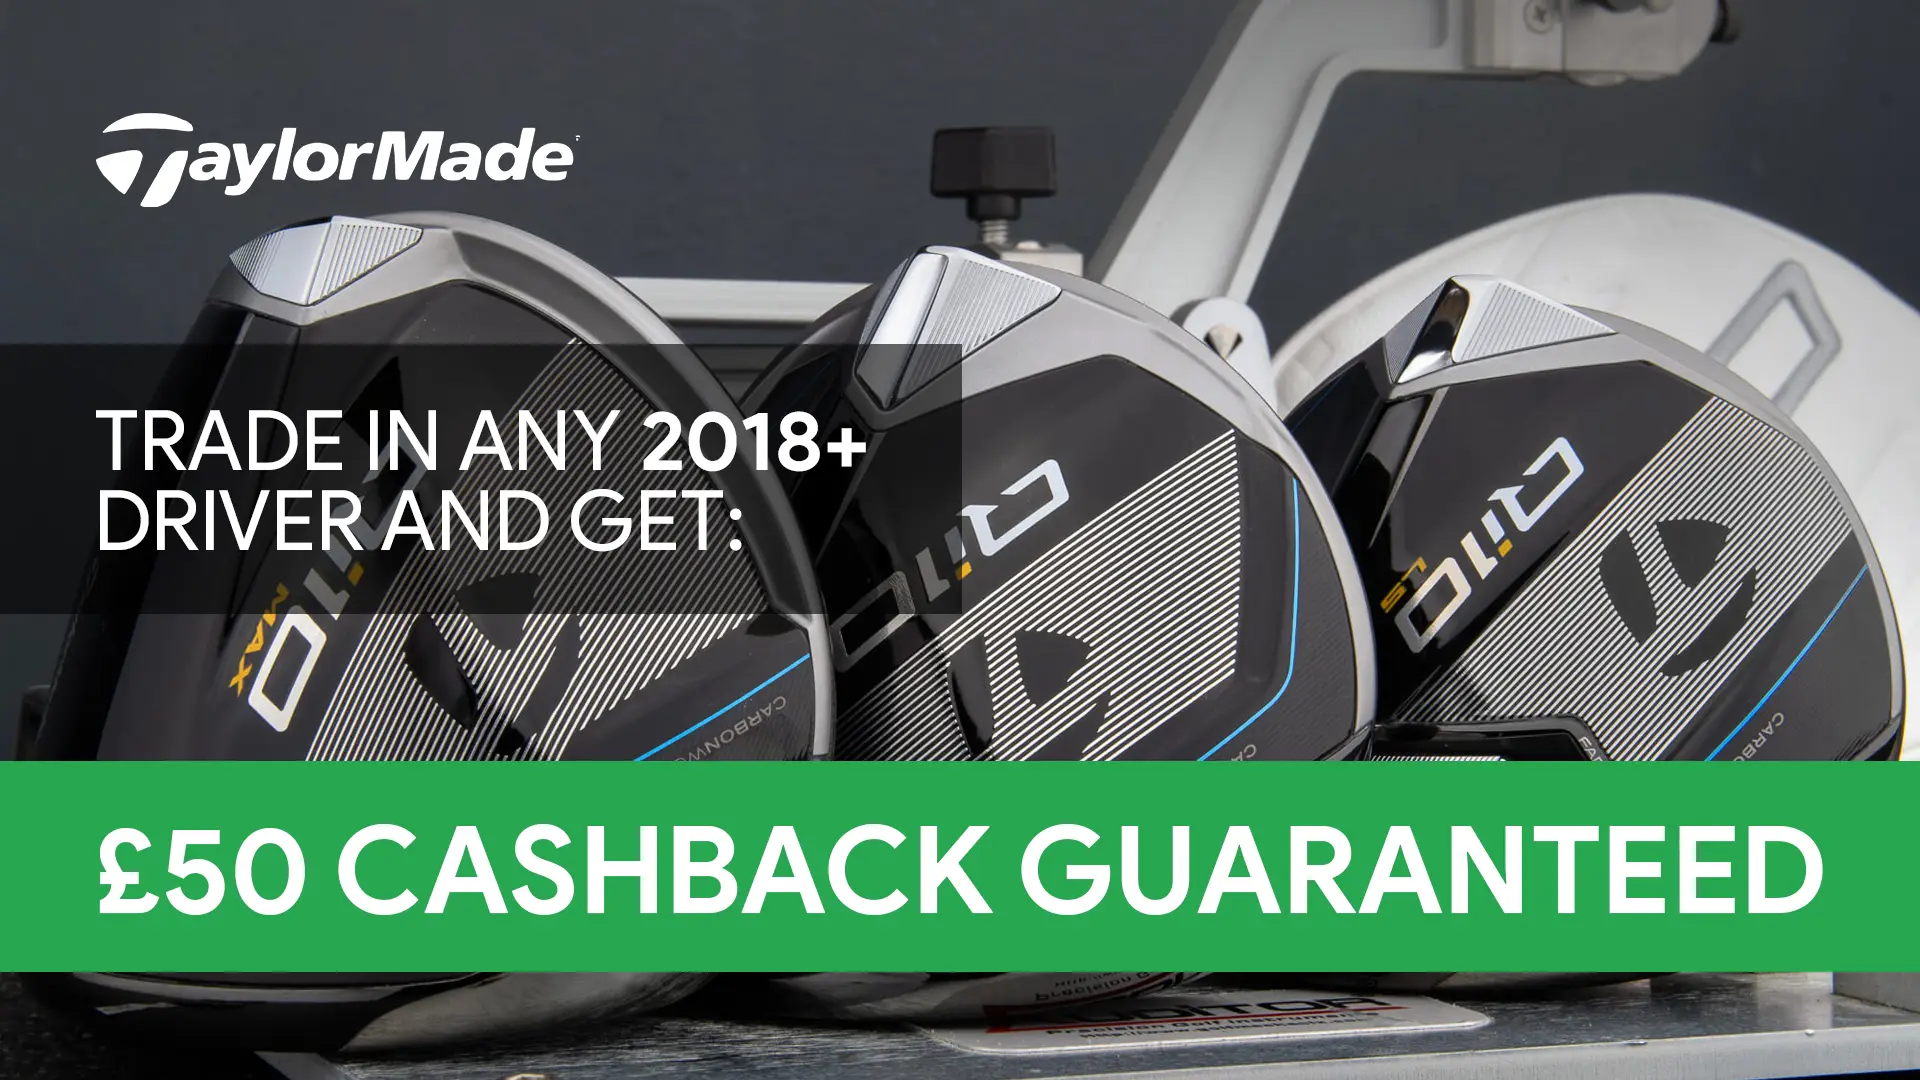 TaylorMade £50 cash back when you trade in any 2018+ driver